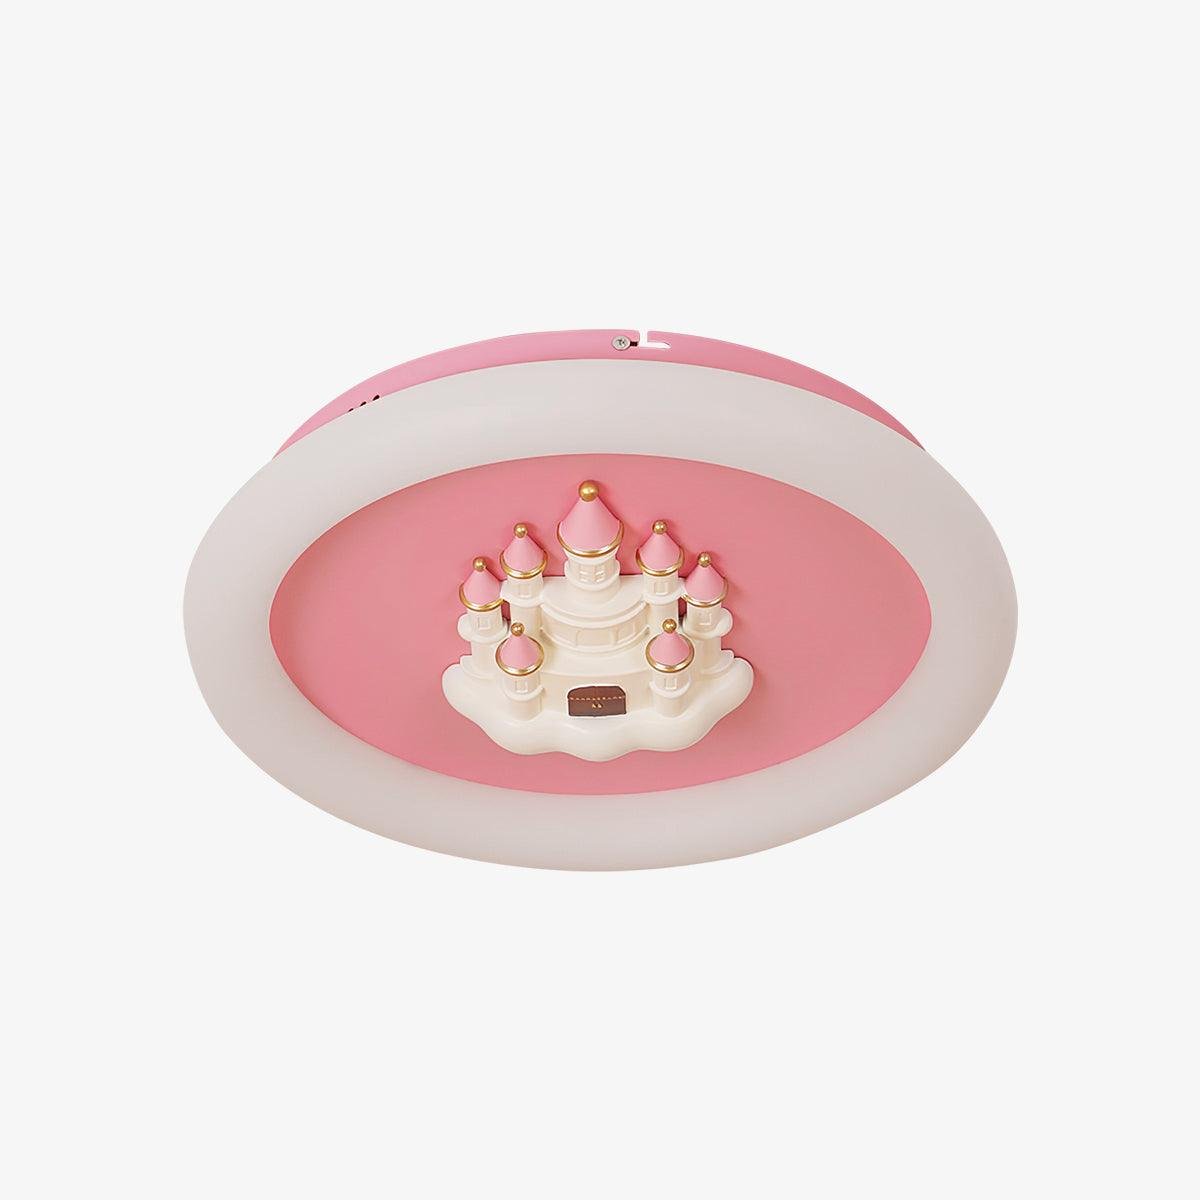 Pink Castle Round Ceiling Lamp with a diameter of 20.1 inches and a height of 4.7 inches (51cm x 12cm), emitting a cool light in a vibrant pink color.